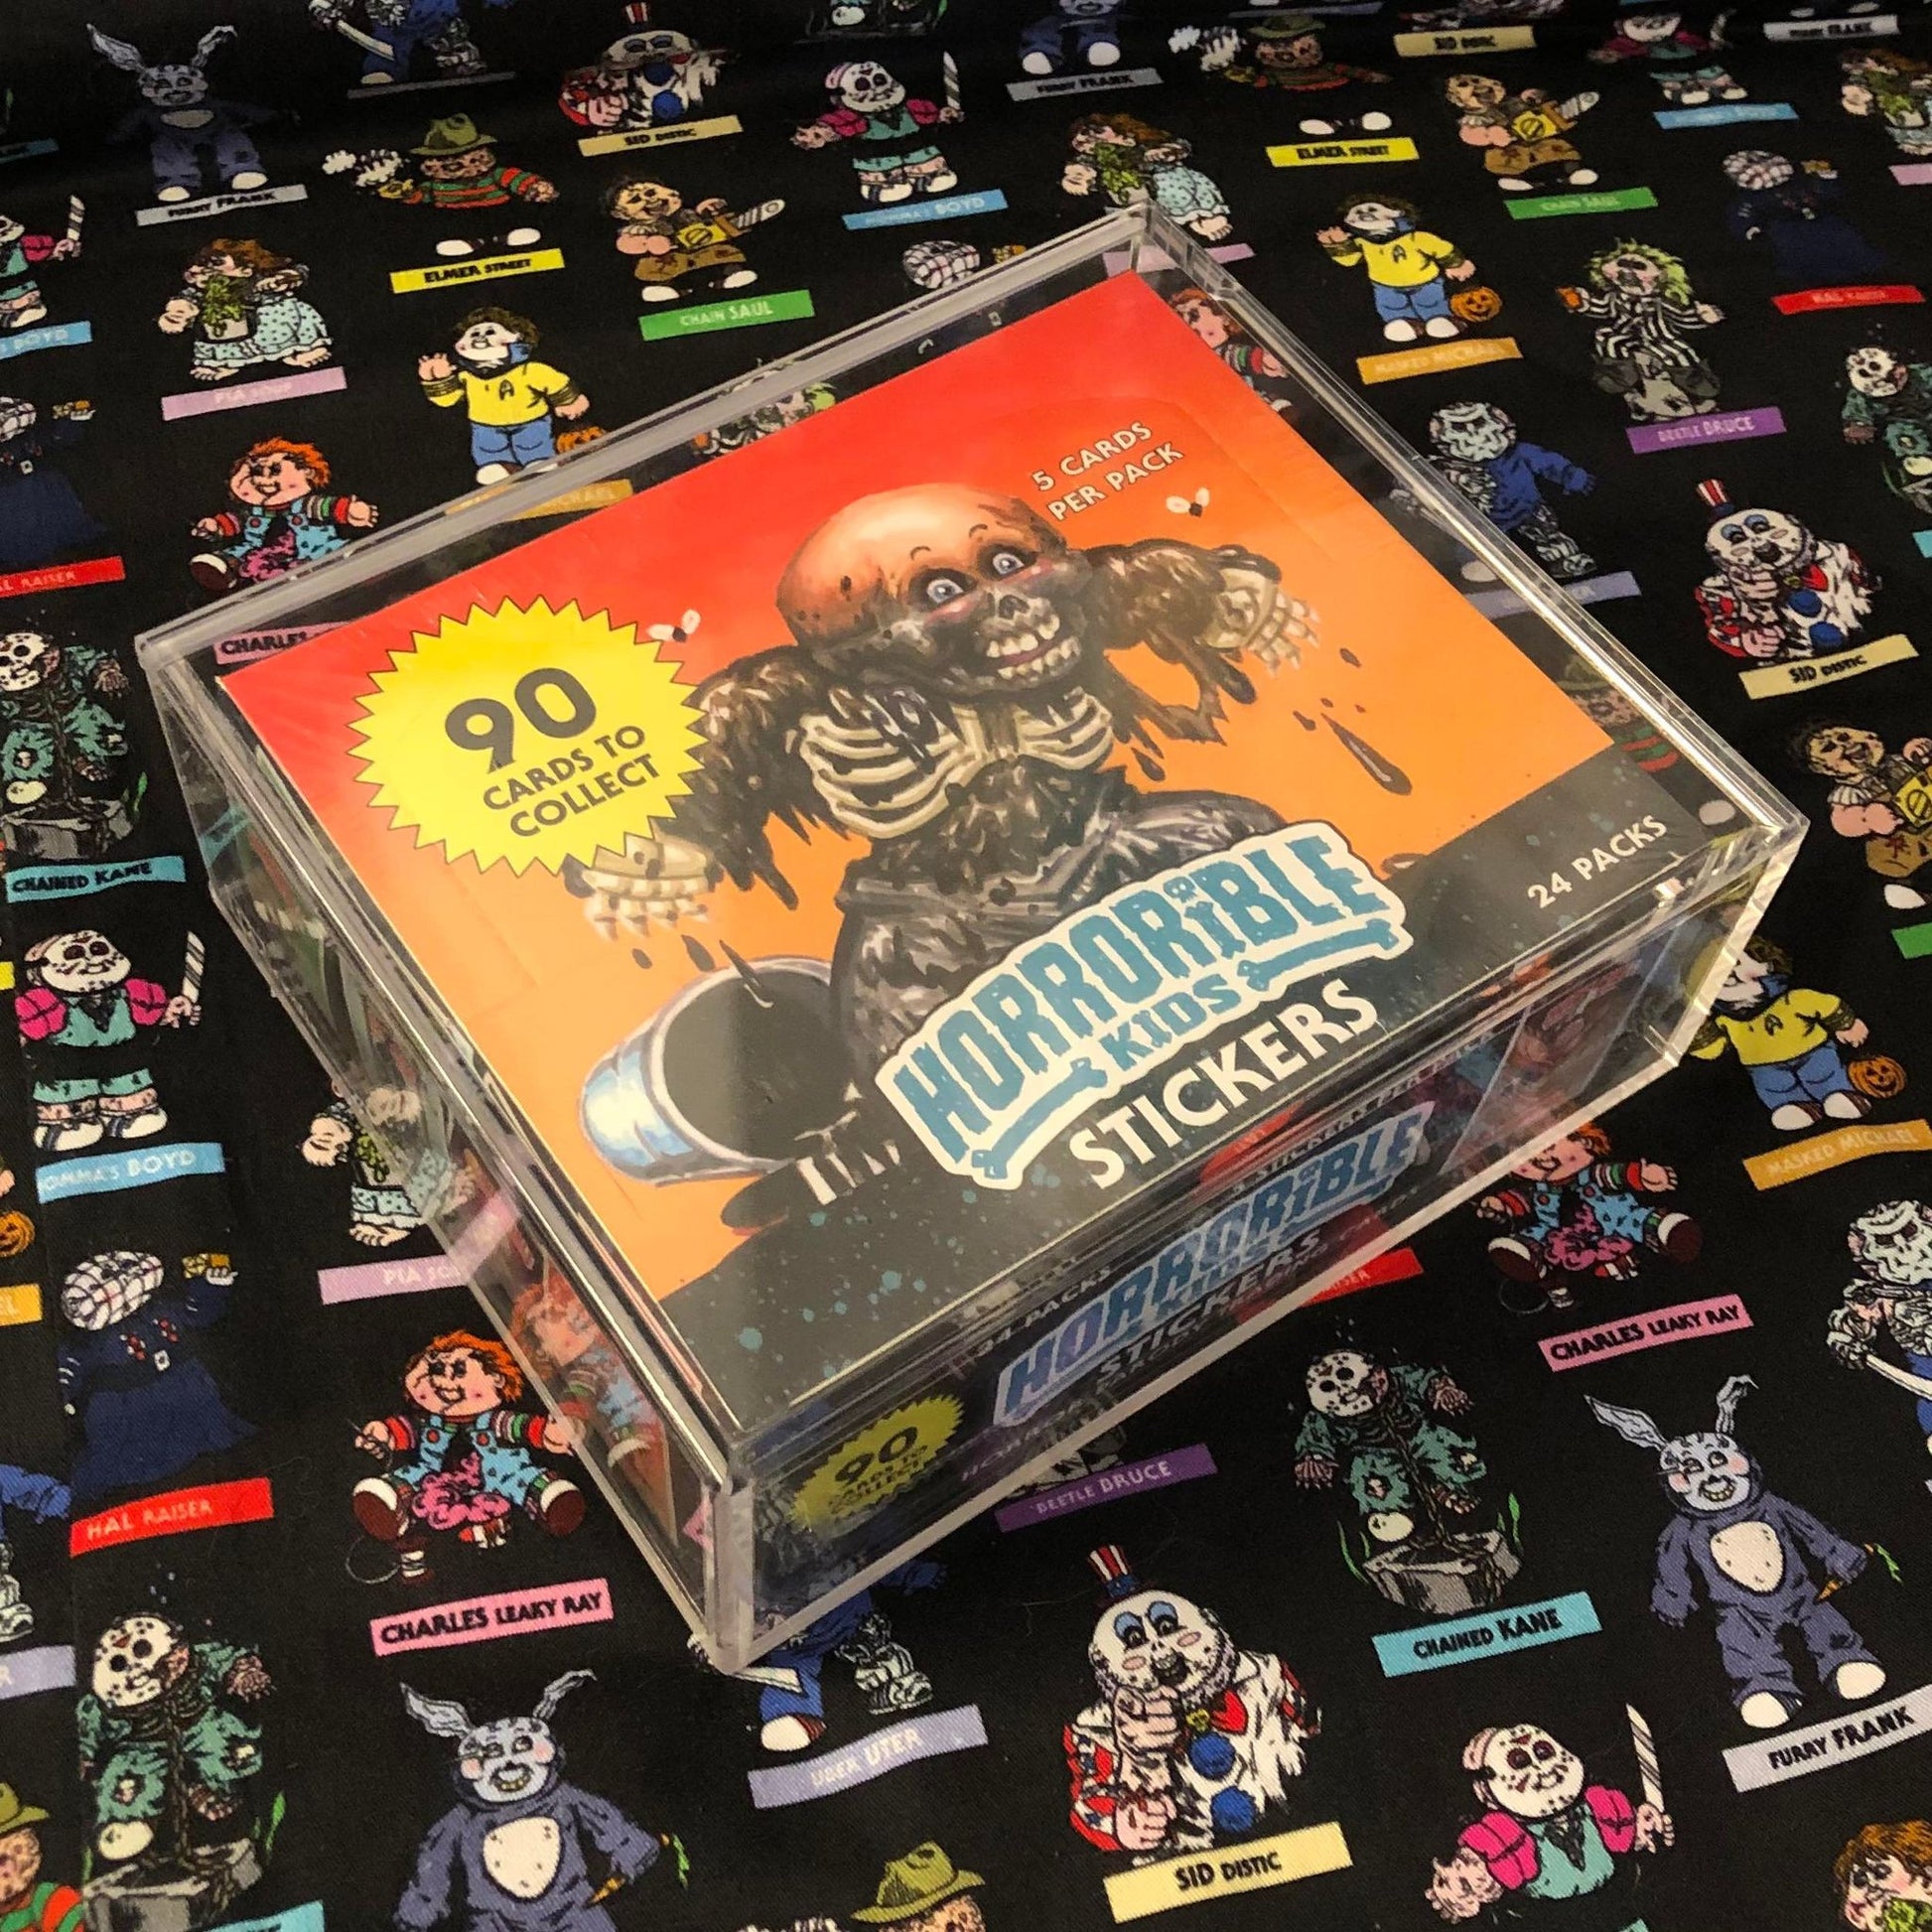 Protective Case For Mark Pingitore's Independent Series 24-pack boxes (The Horrorible, Nintendopes, Disasters, etc.) - Acrydis